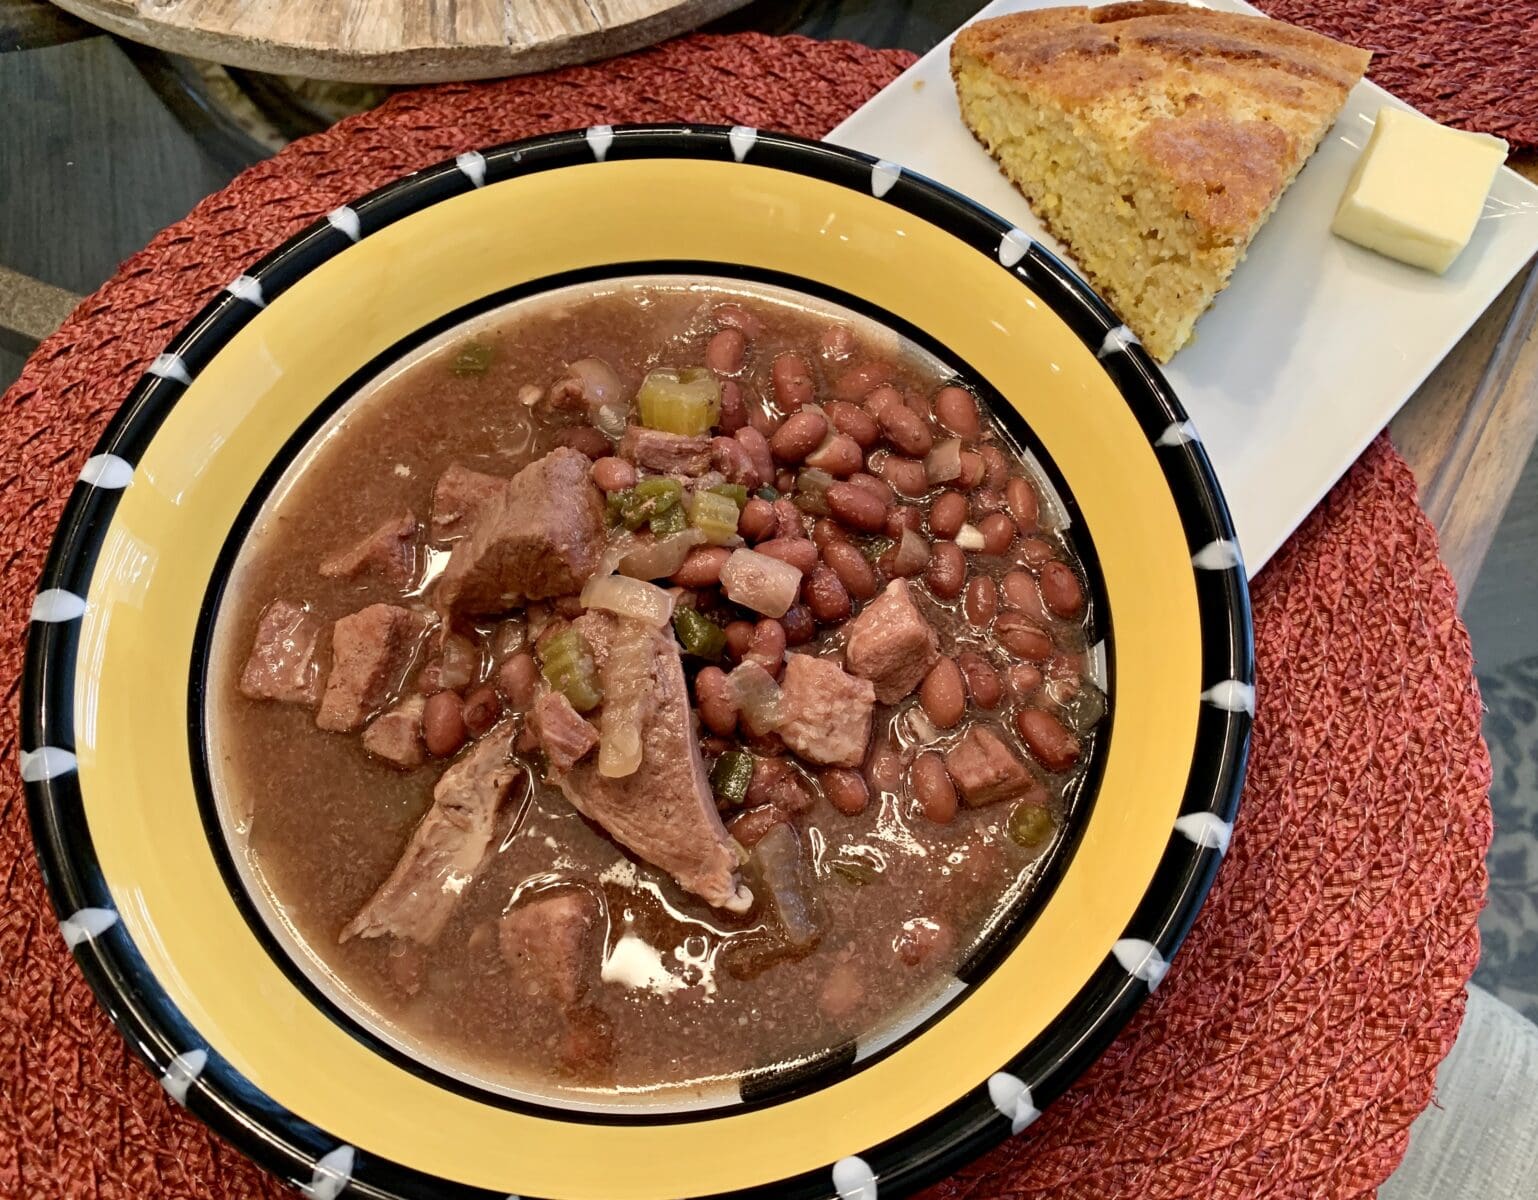 Red Bean soup and cornbread